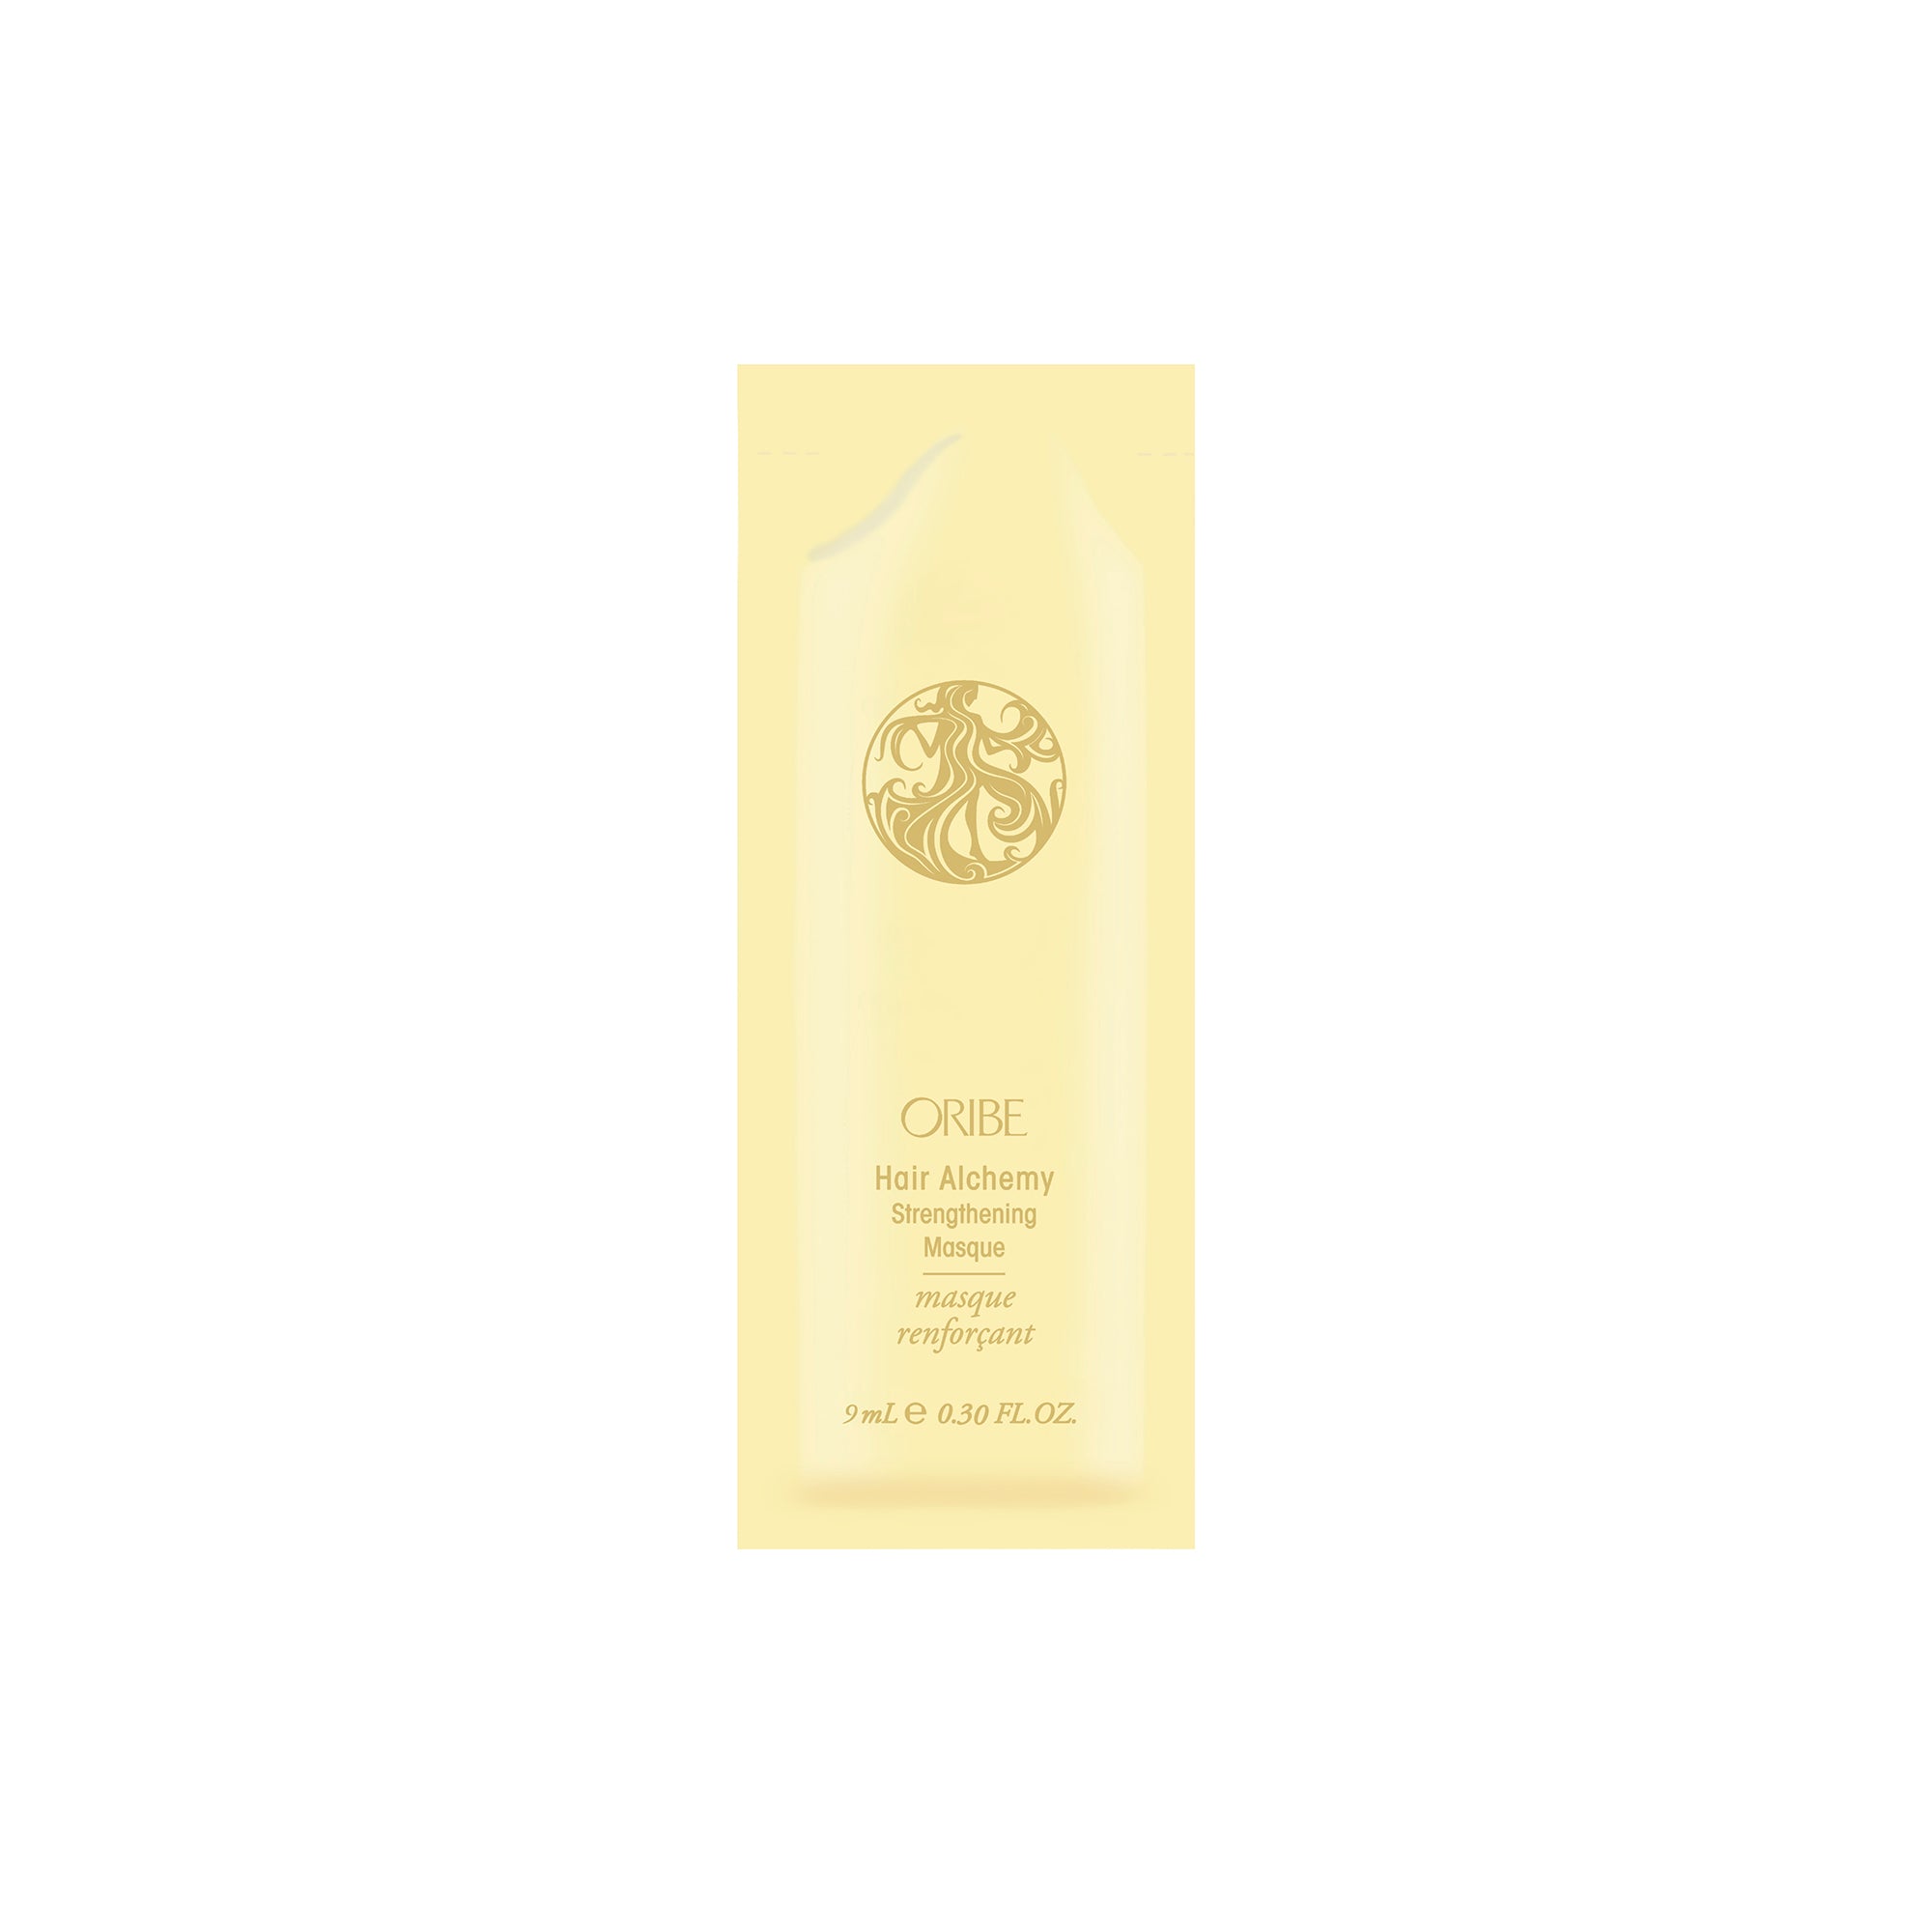 Hair Alchemy Strengthening Masque Packette